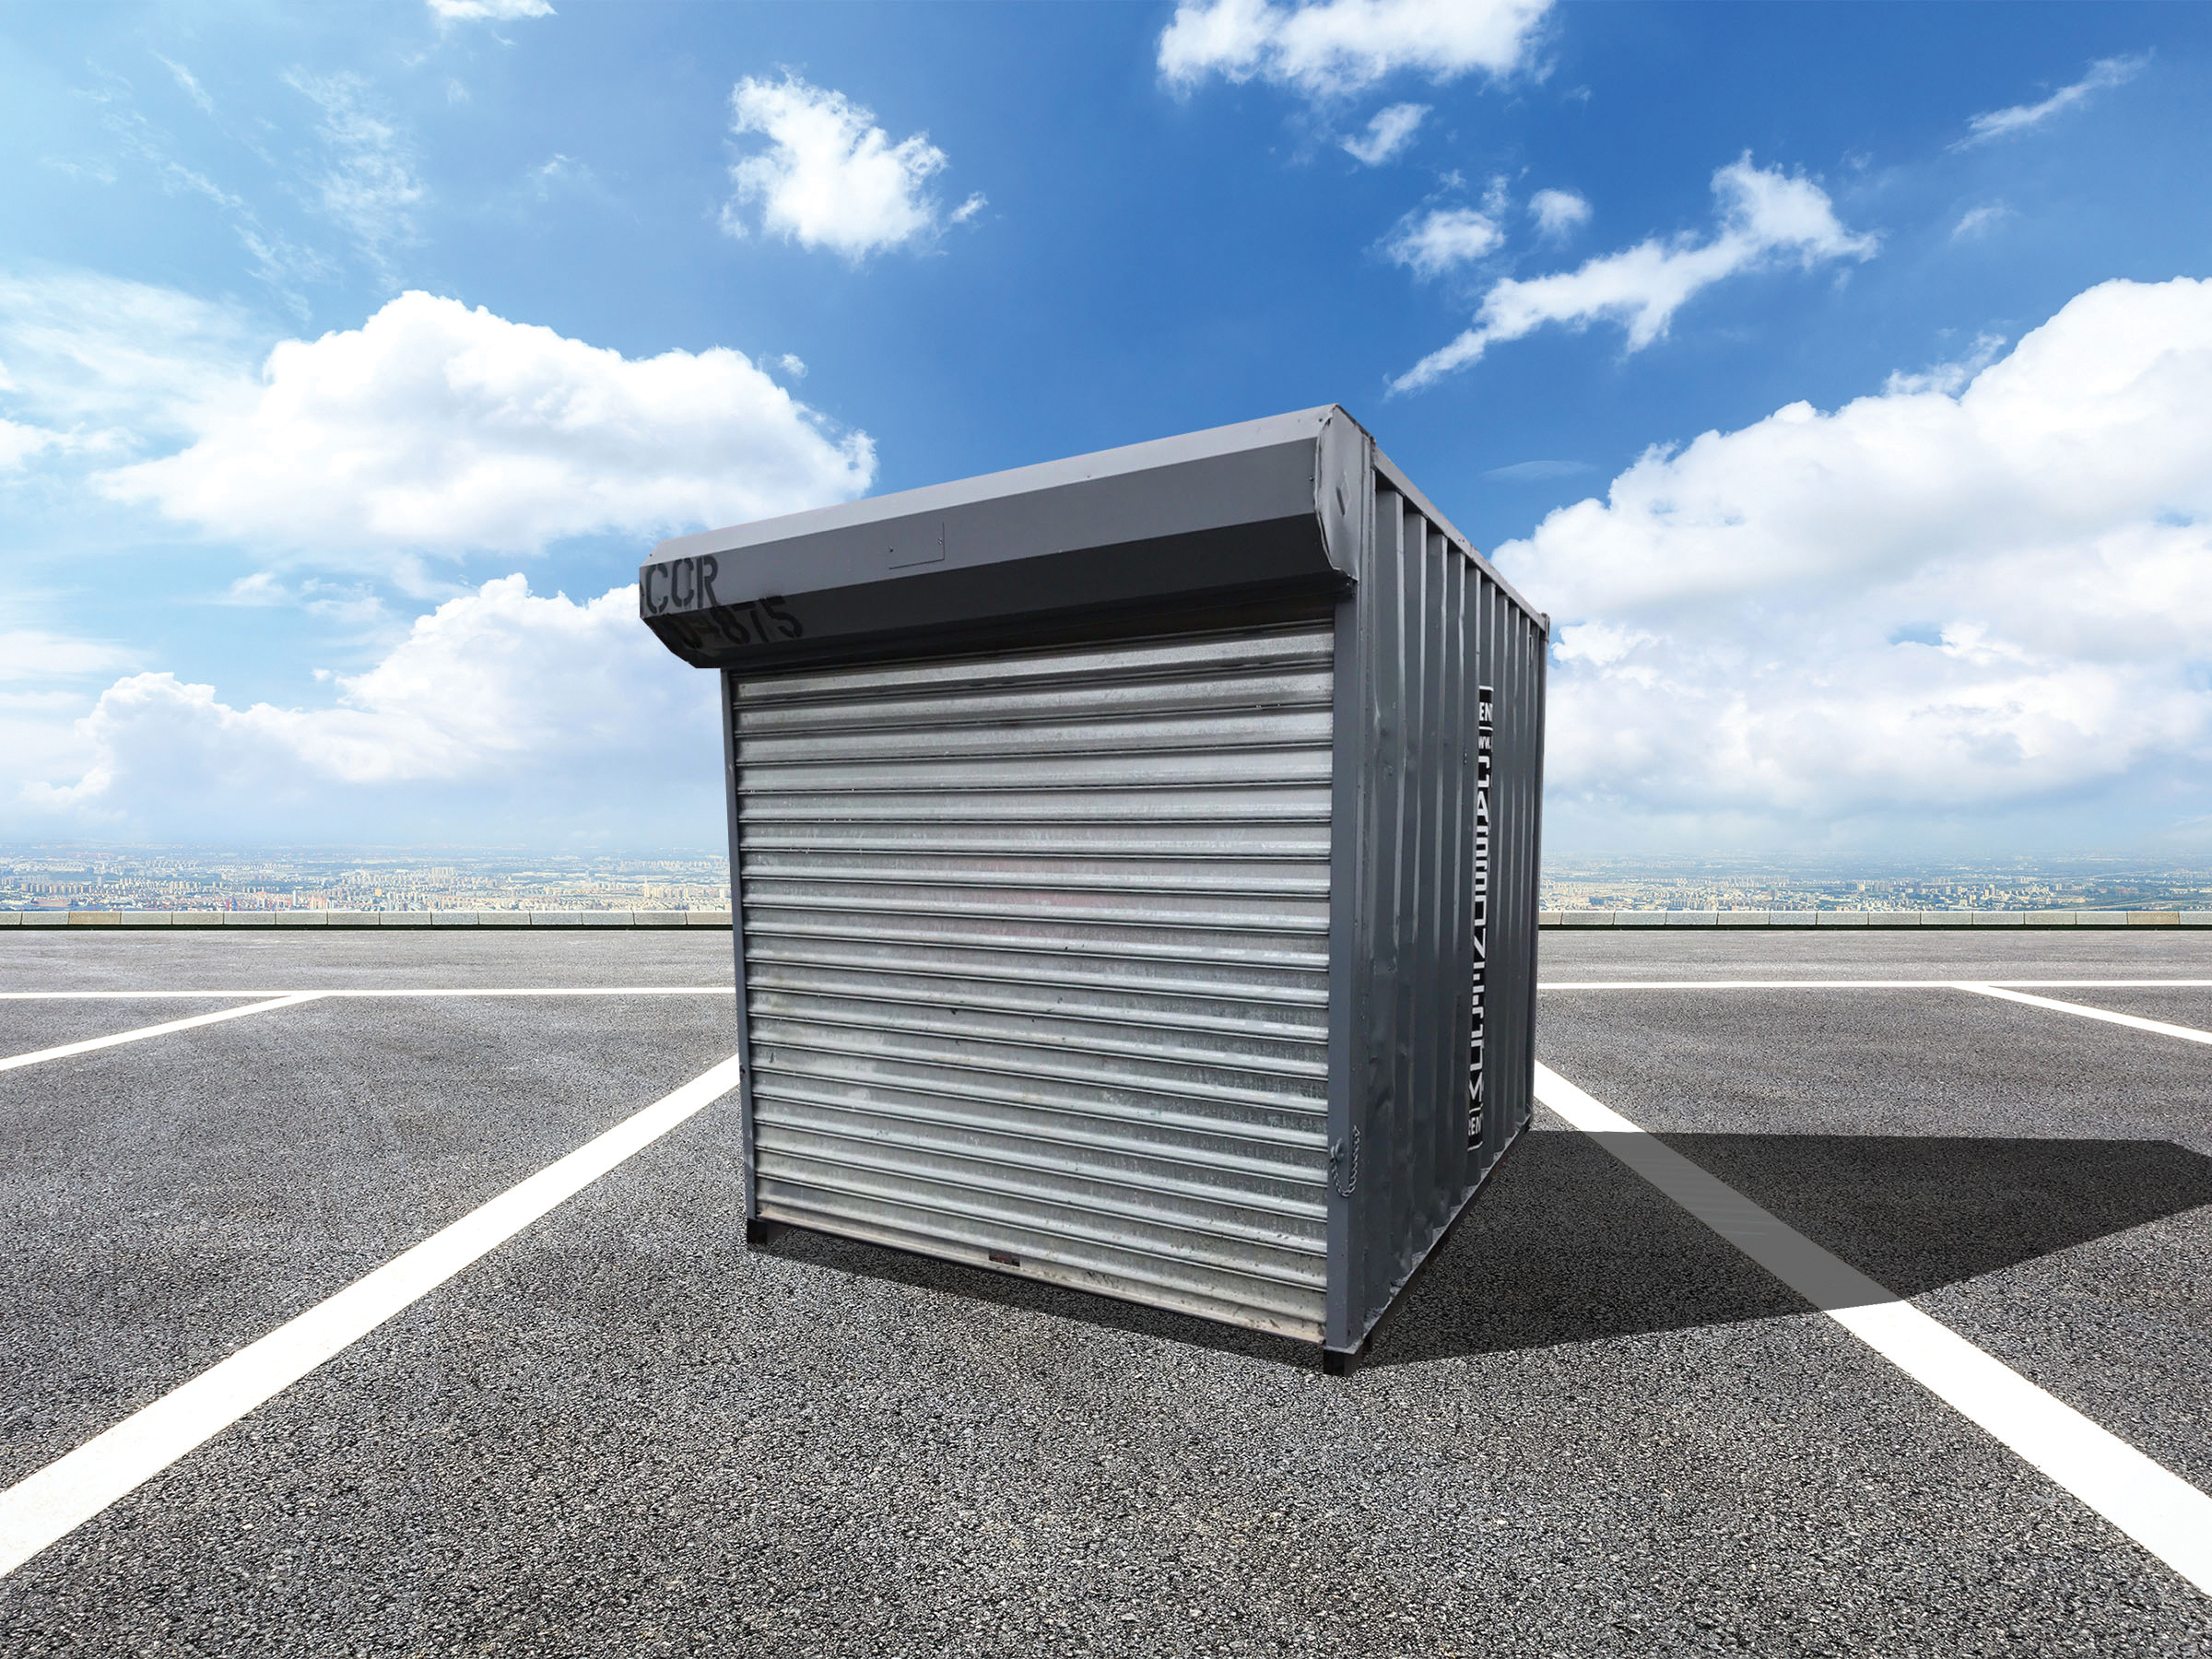 https://www.cassone.com/wp-content/uploads/2020/05/Cassone-Ground-Level-Storage-Containers-Parking-Lot-10-Ft.jpg